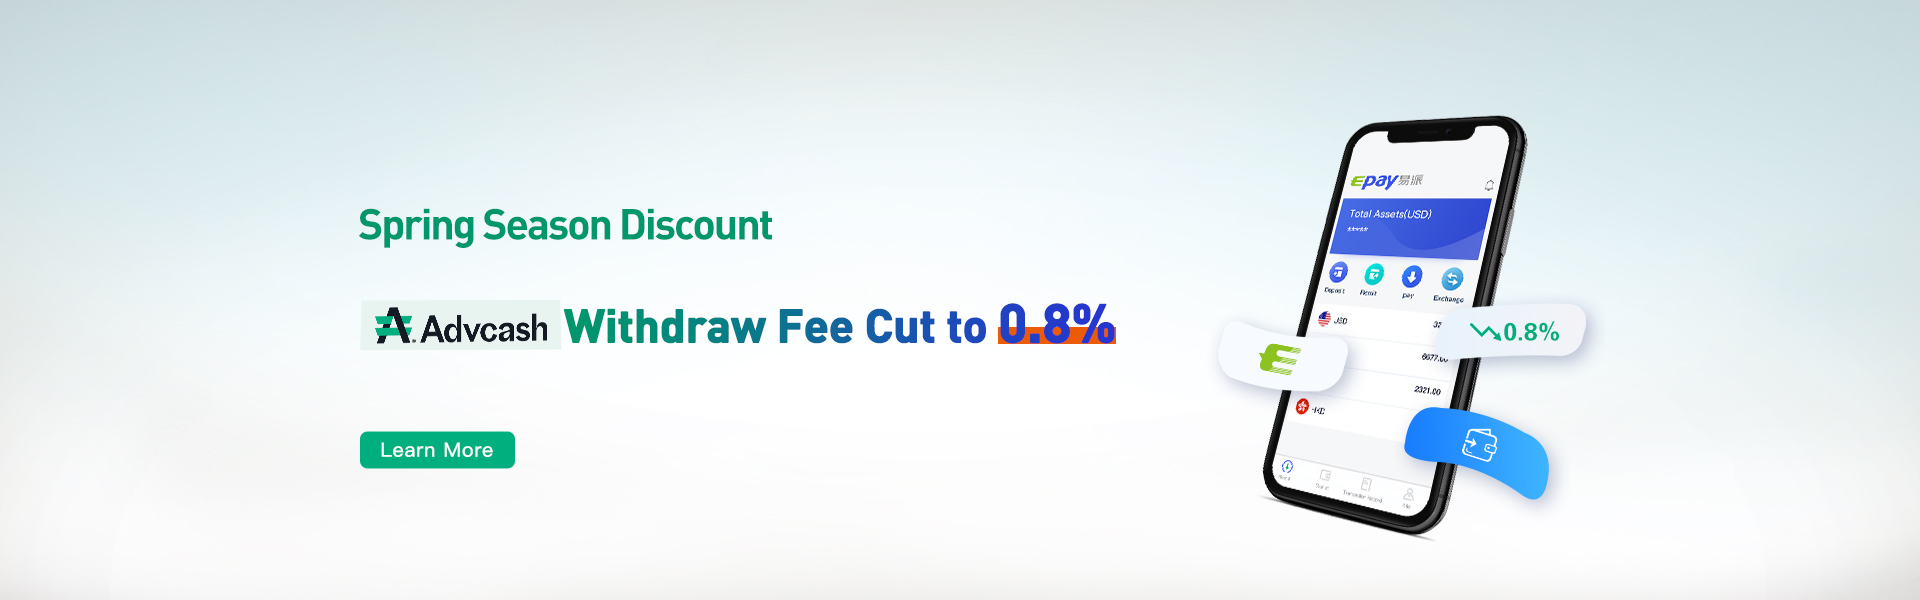 advcash withdrawal fee low to 0.8%